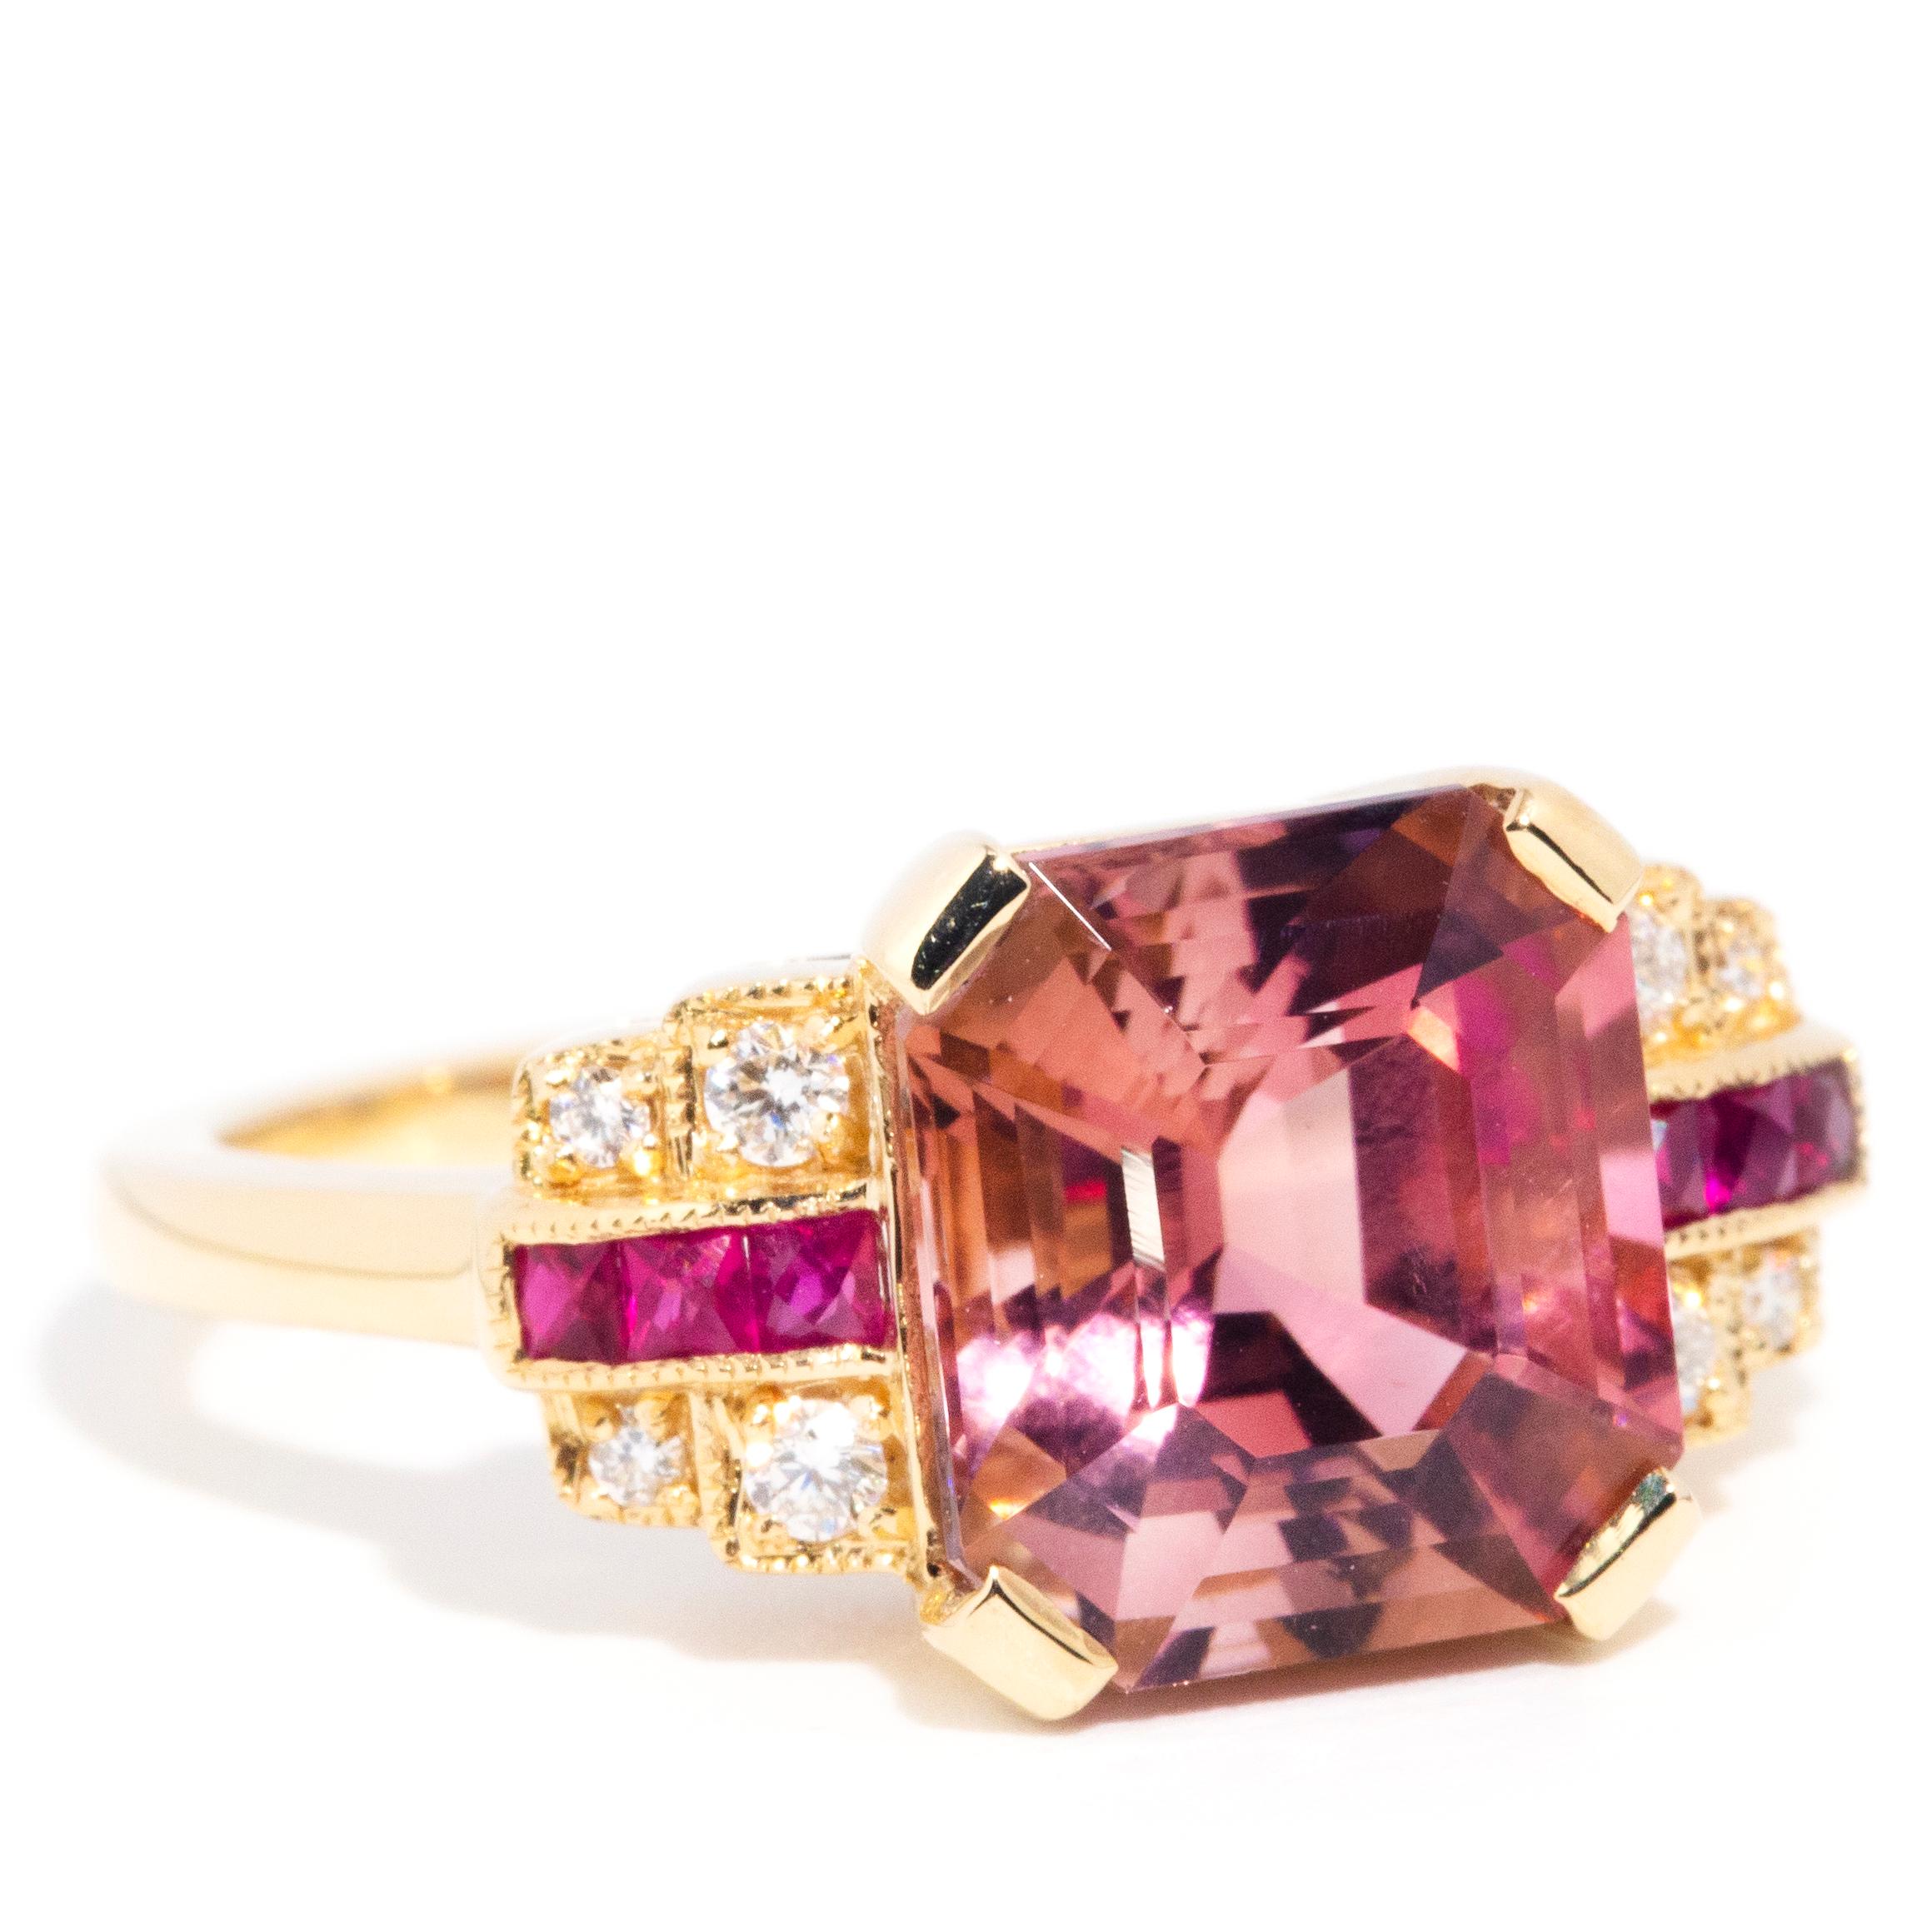 Forged in 18 carat yellow gold, this fanciful contemporary art deco-inspired features an opulent 4.21 carat Asscher cut bright pink tourmaline seated between raised shoulders each embellished with four sparkling round brilliant diamonds and embedded